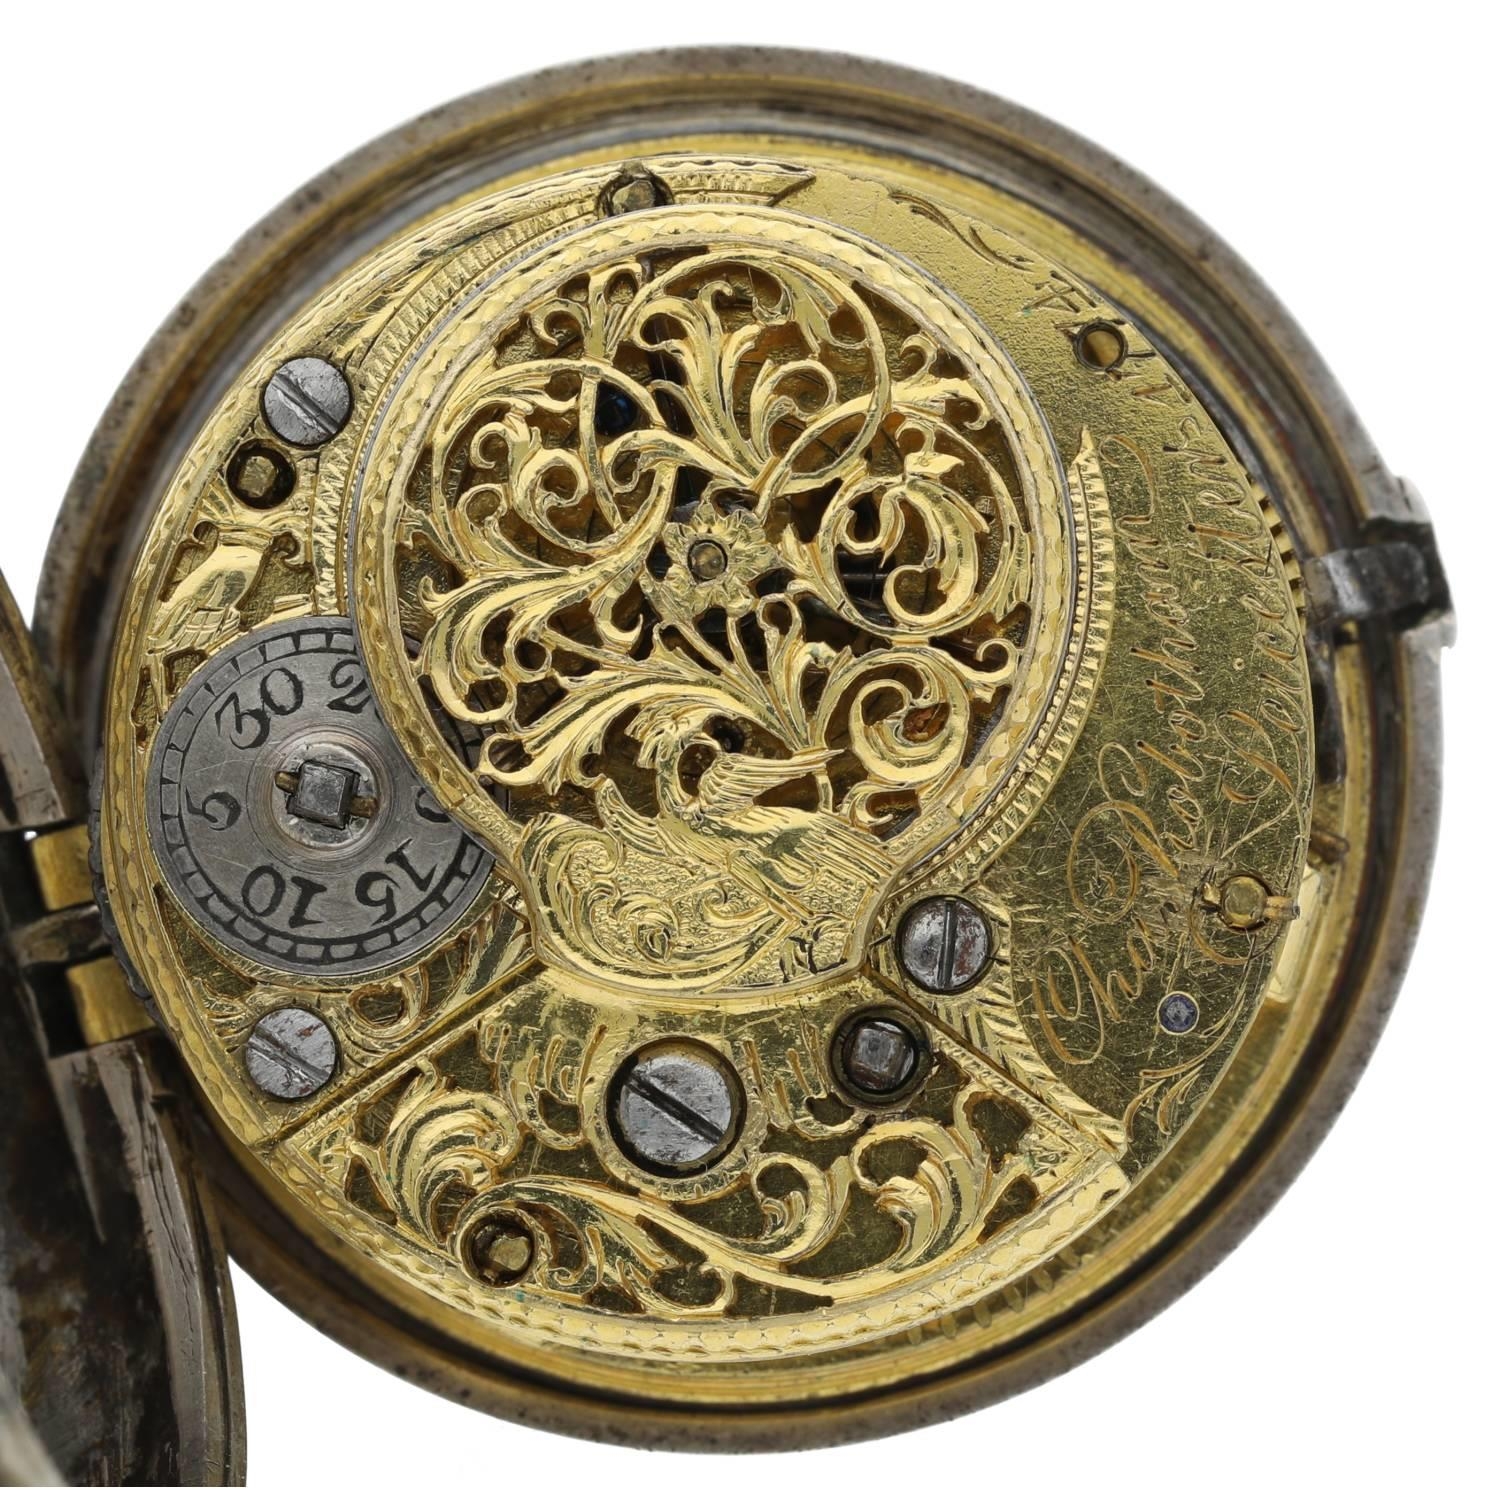 Chas. Robotham, Leicester - English 18th century silver pair cased verge pocket watch, London - Image 4 of 10